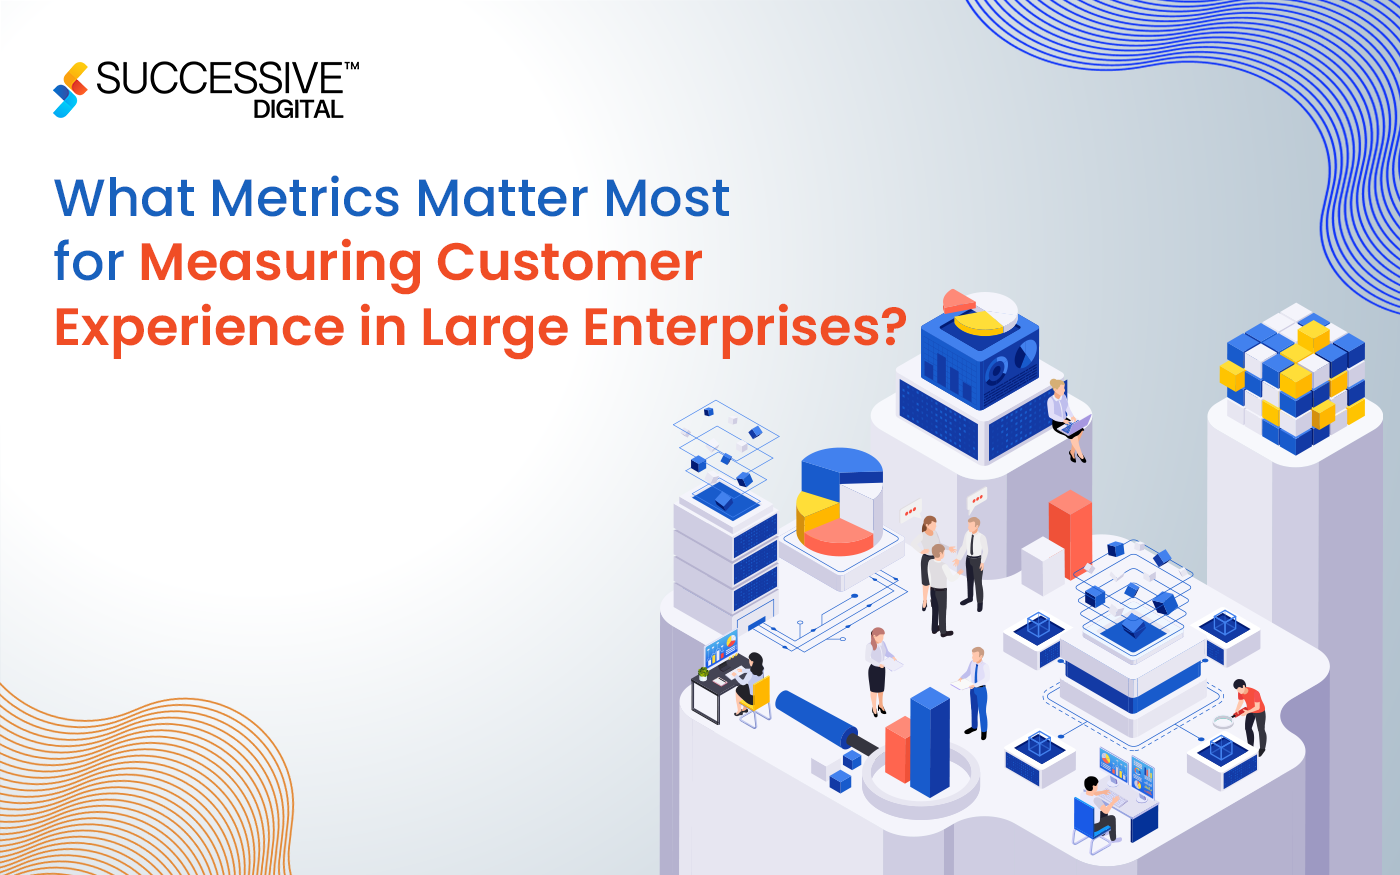 What Metrics Matter Most for Measuring Customer Experience in Large Enterprises?